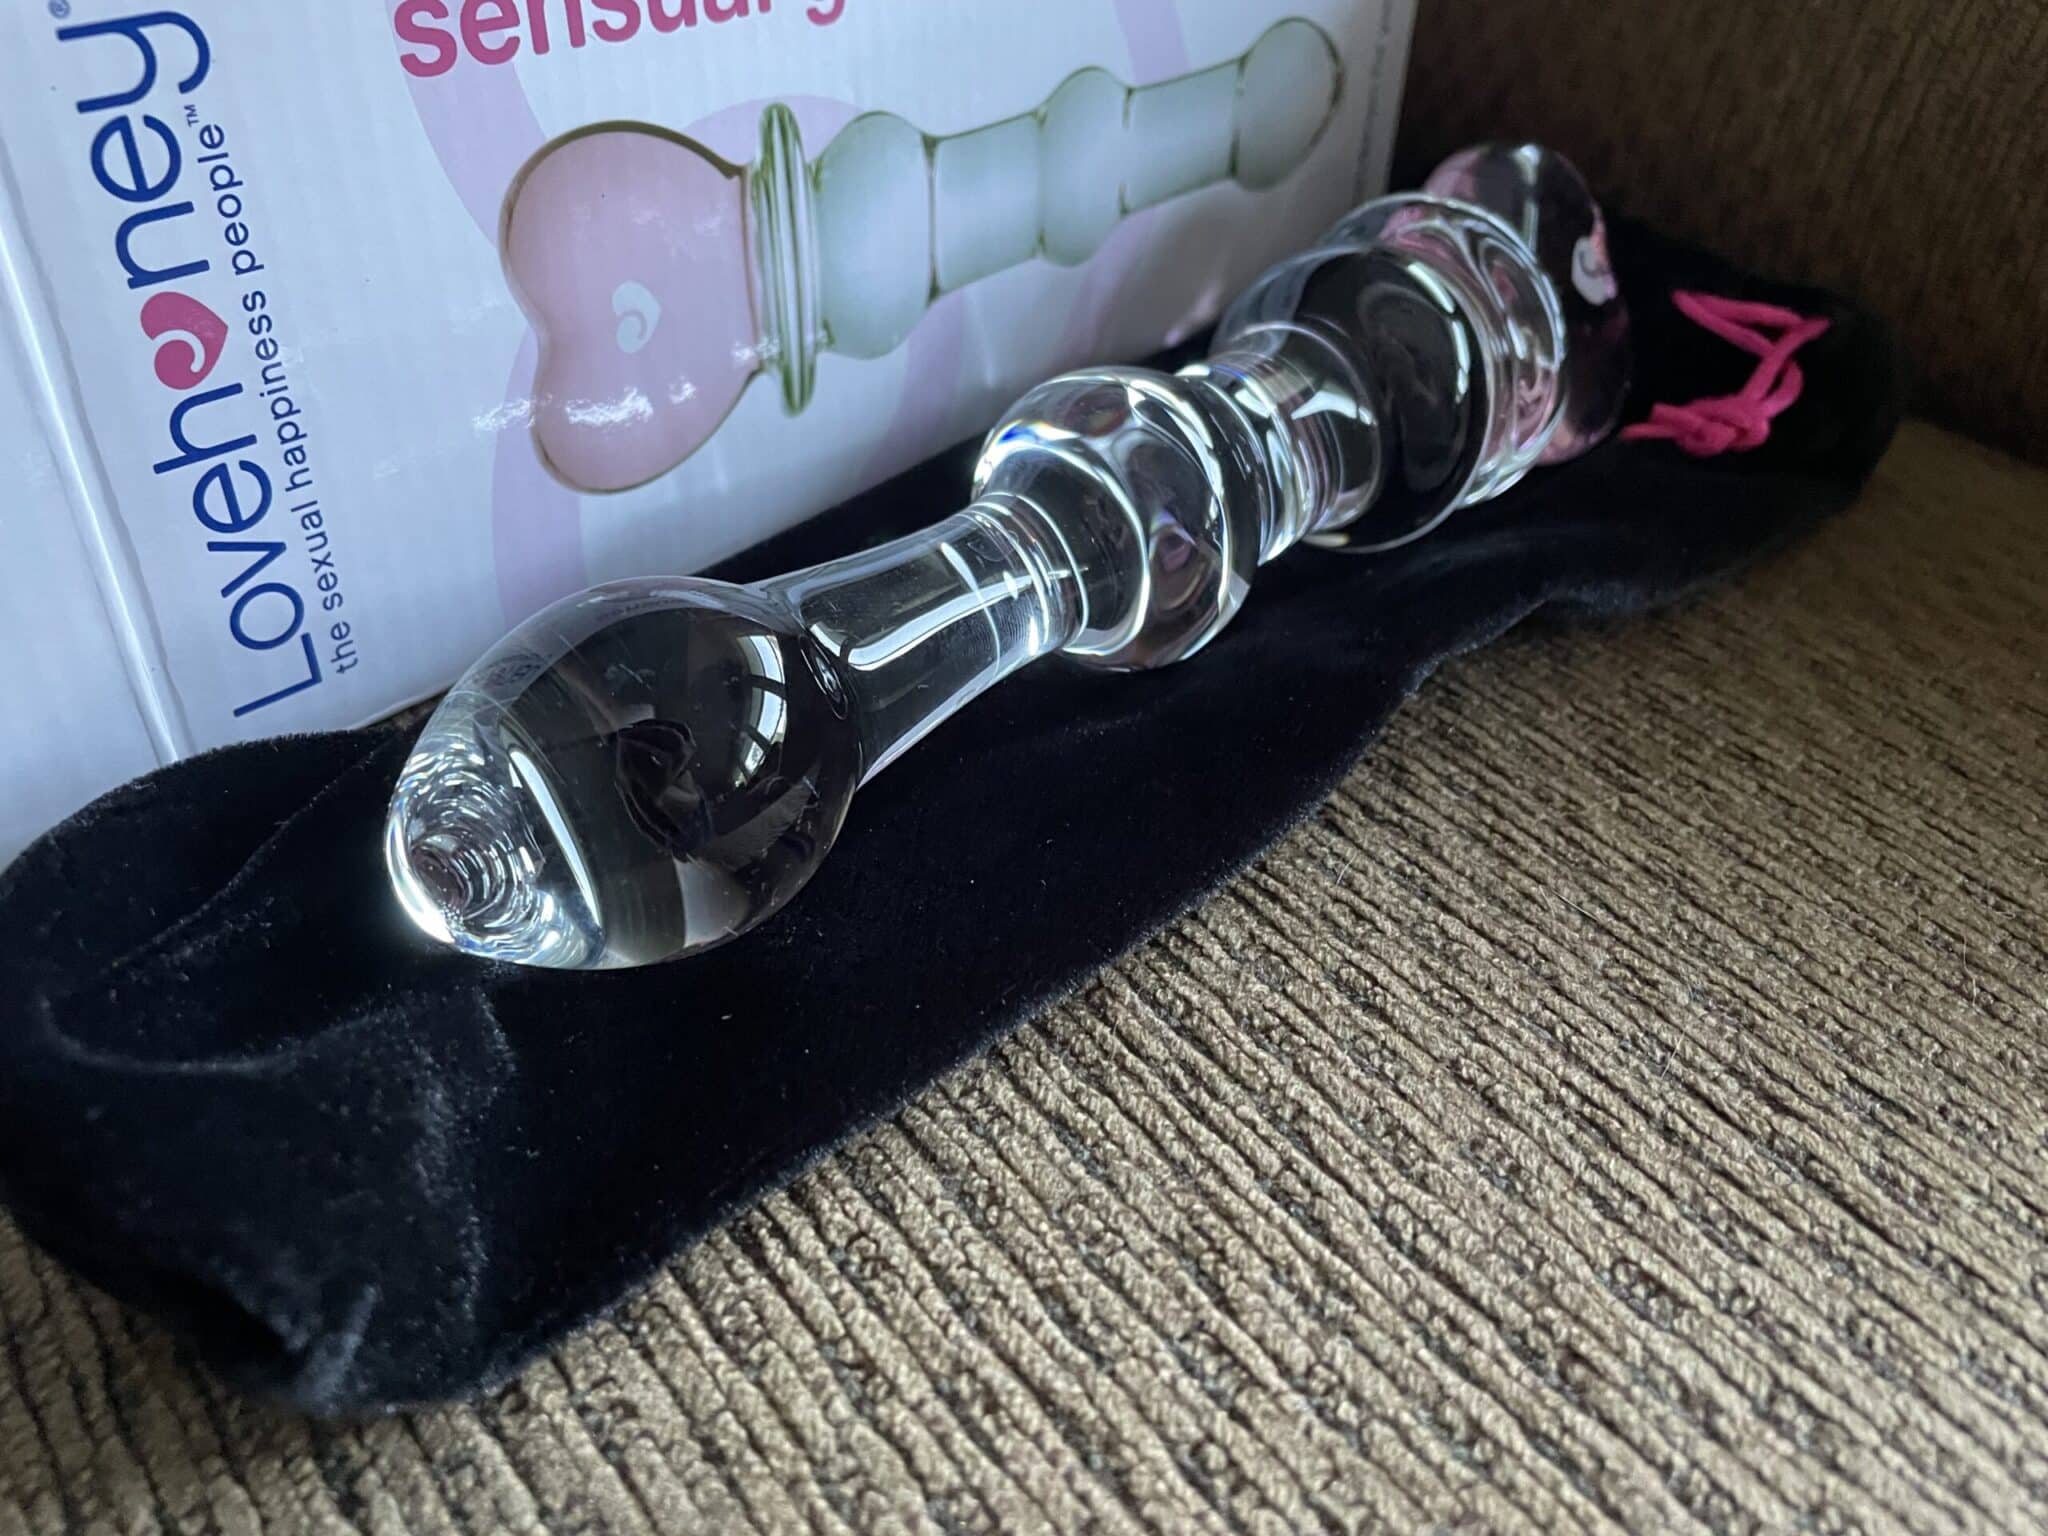 Crystal Heart Glass Dildo How easy was it to use?